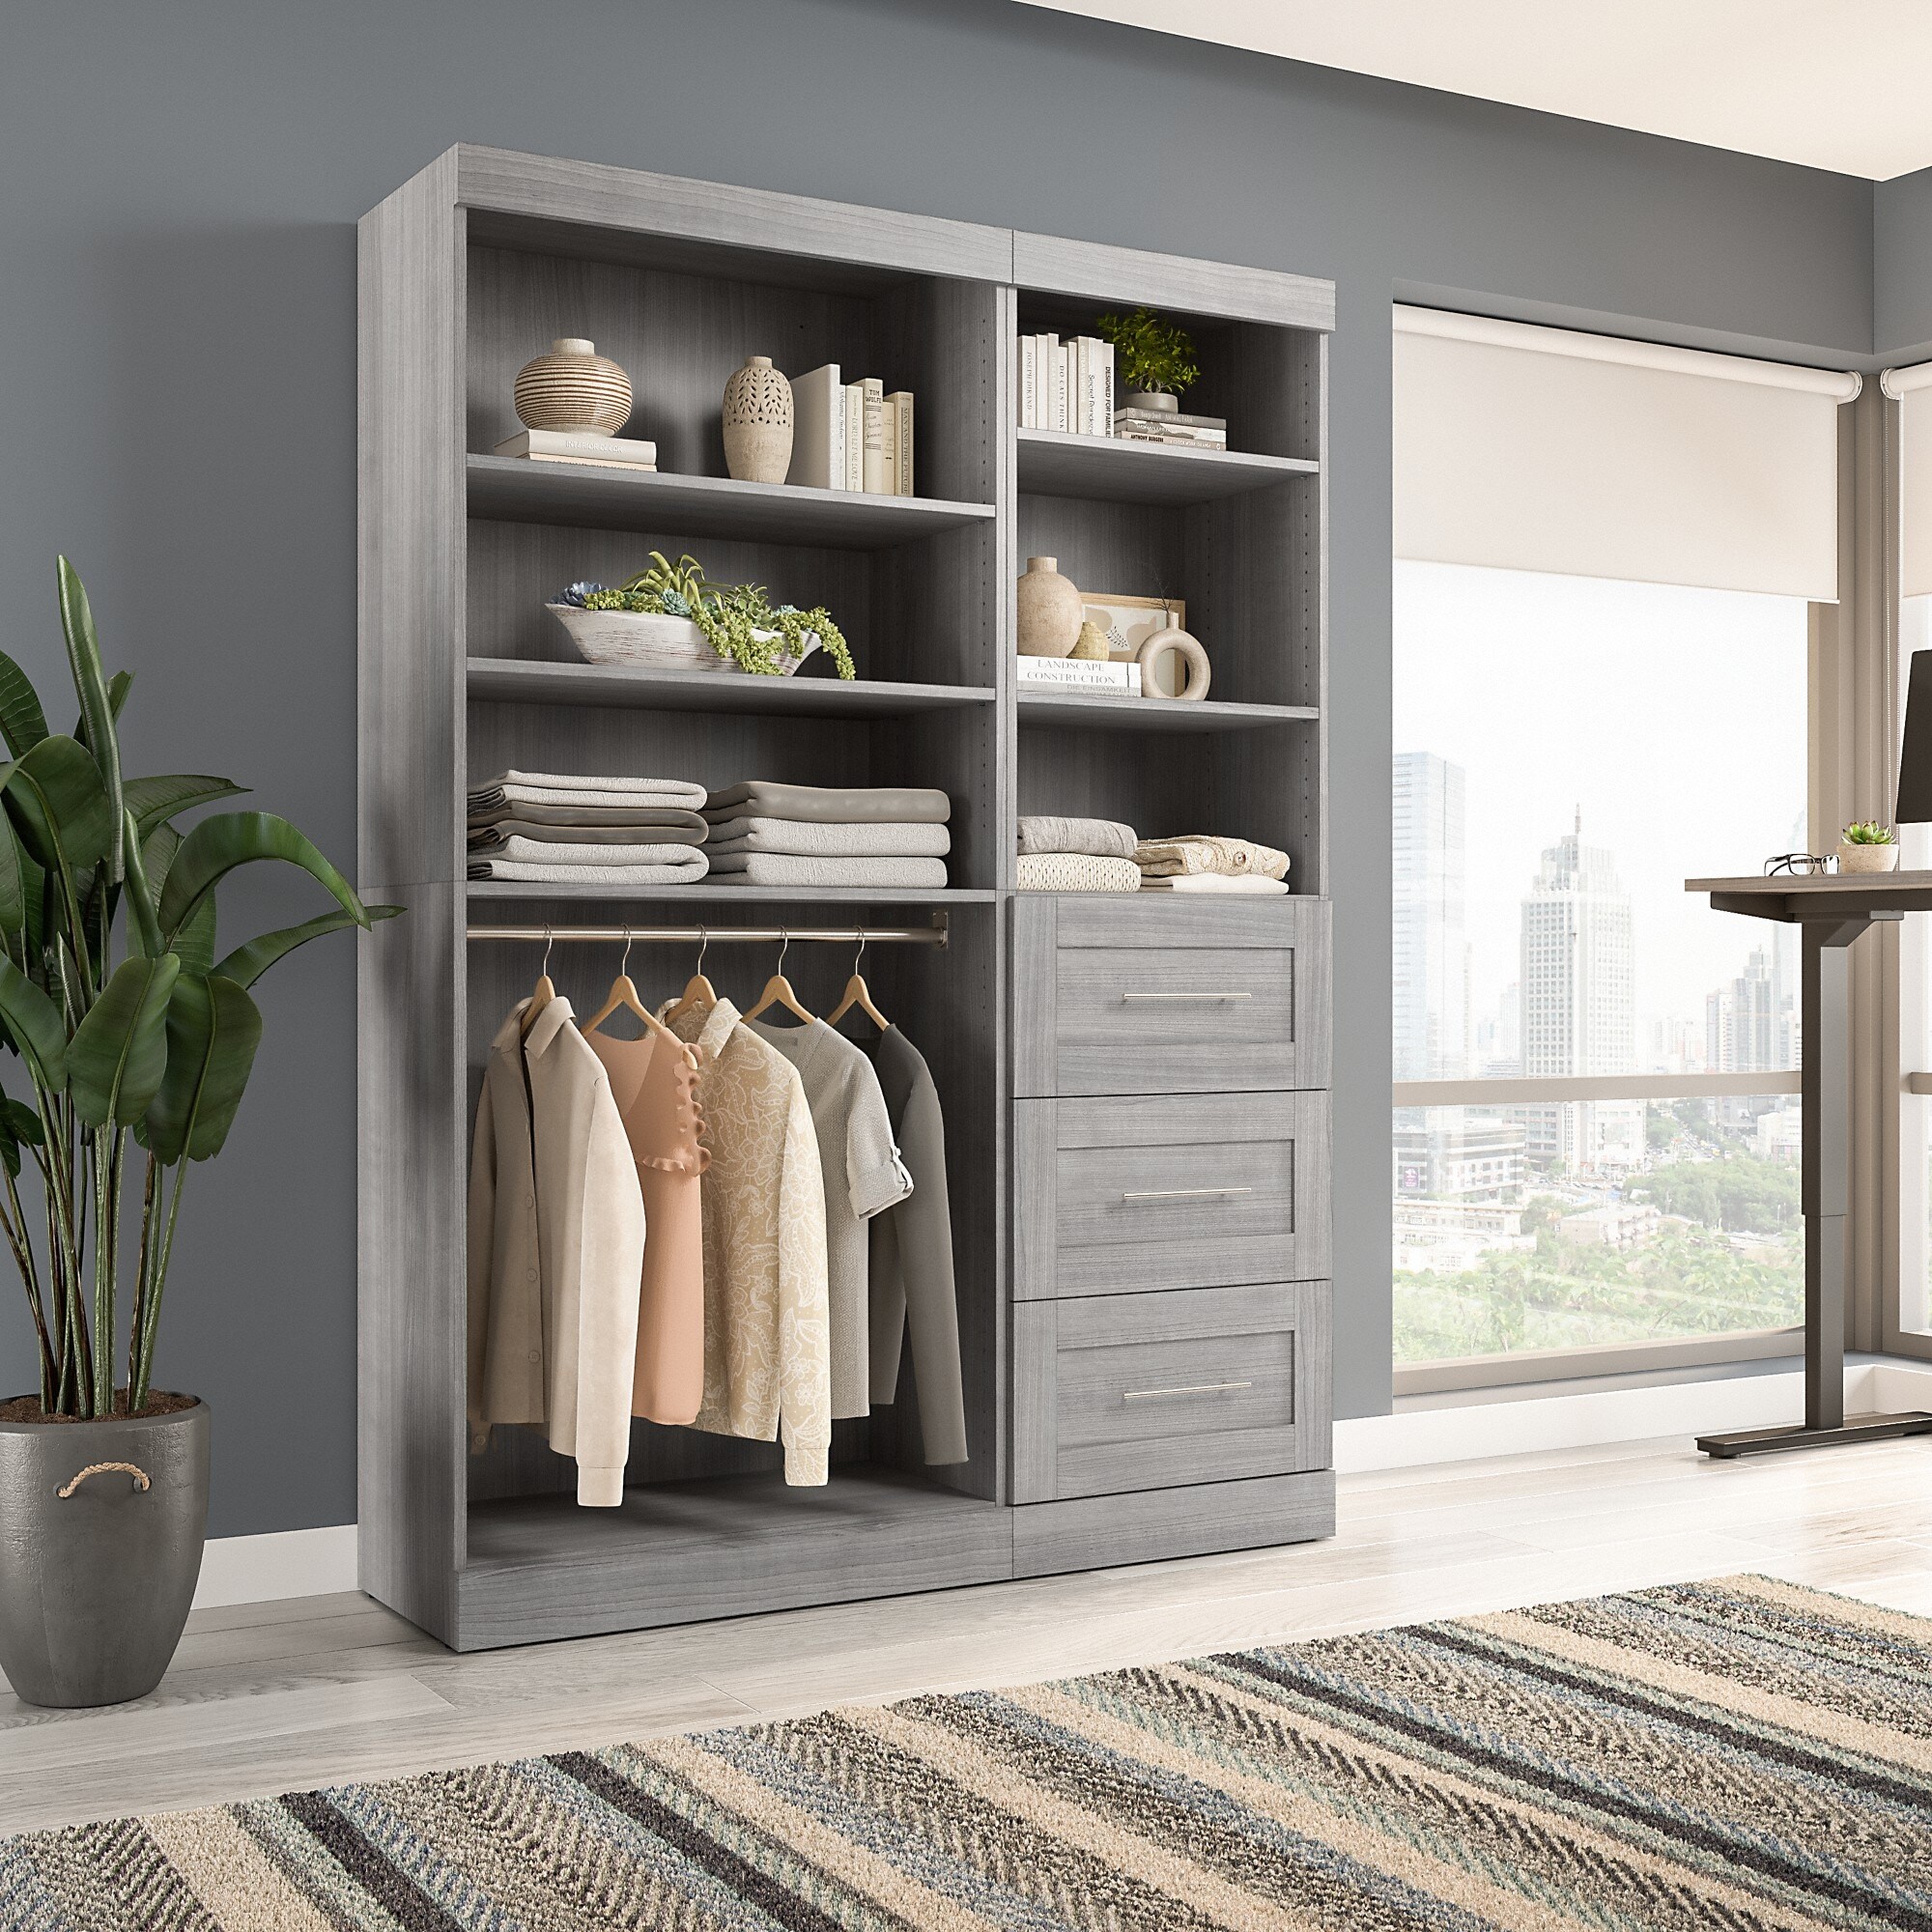 https://ak1.ostkcdn.com/images/products/is/images/direct/5341b0bd7b3a89c58a331d8ce2ab942b4b01d49d/Pur-61W-Closet-Organizer-System-by-Bestar.jpg